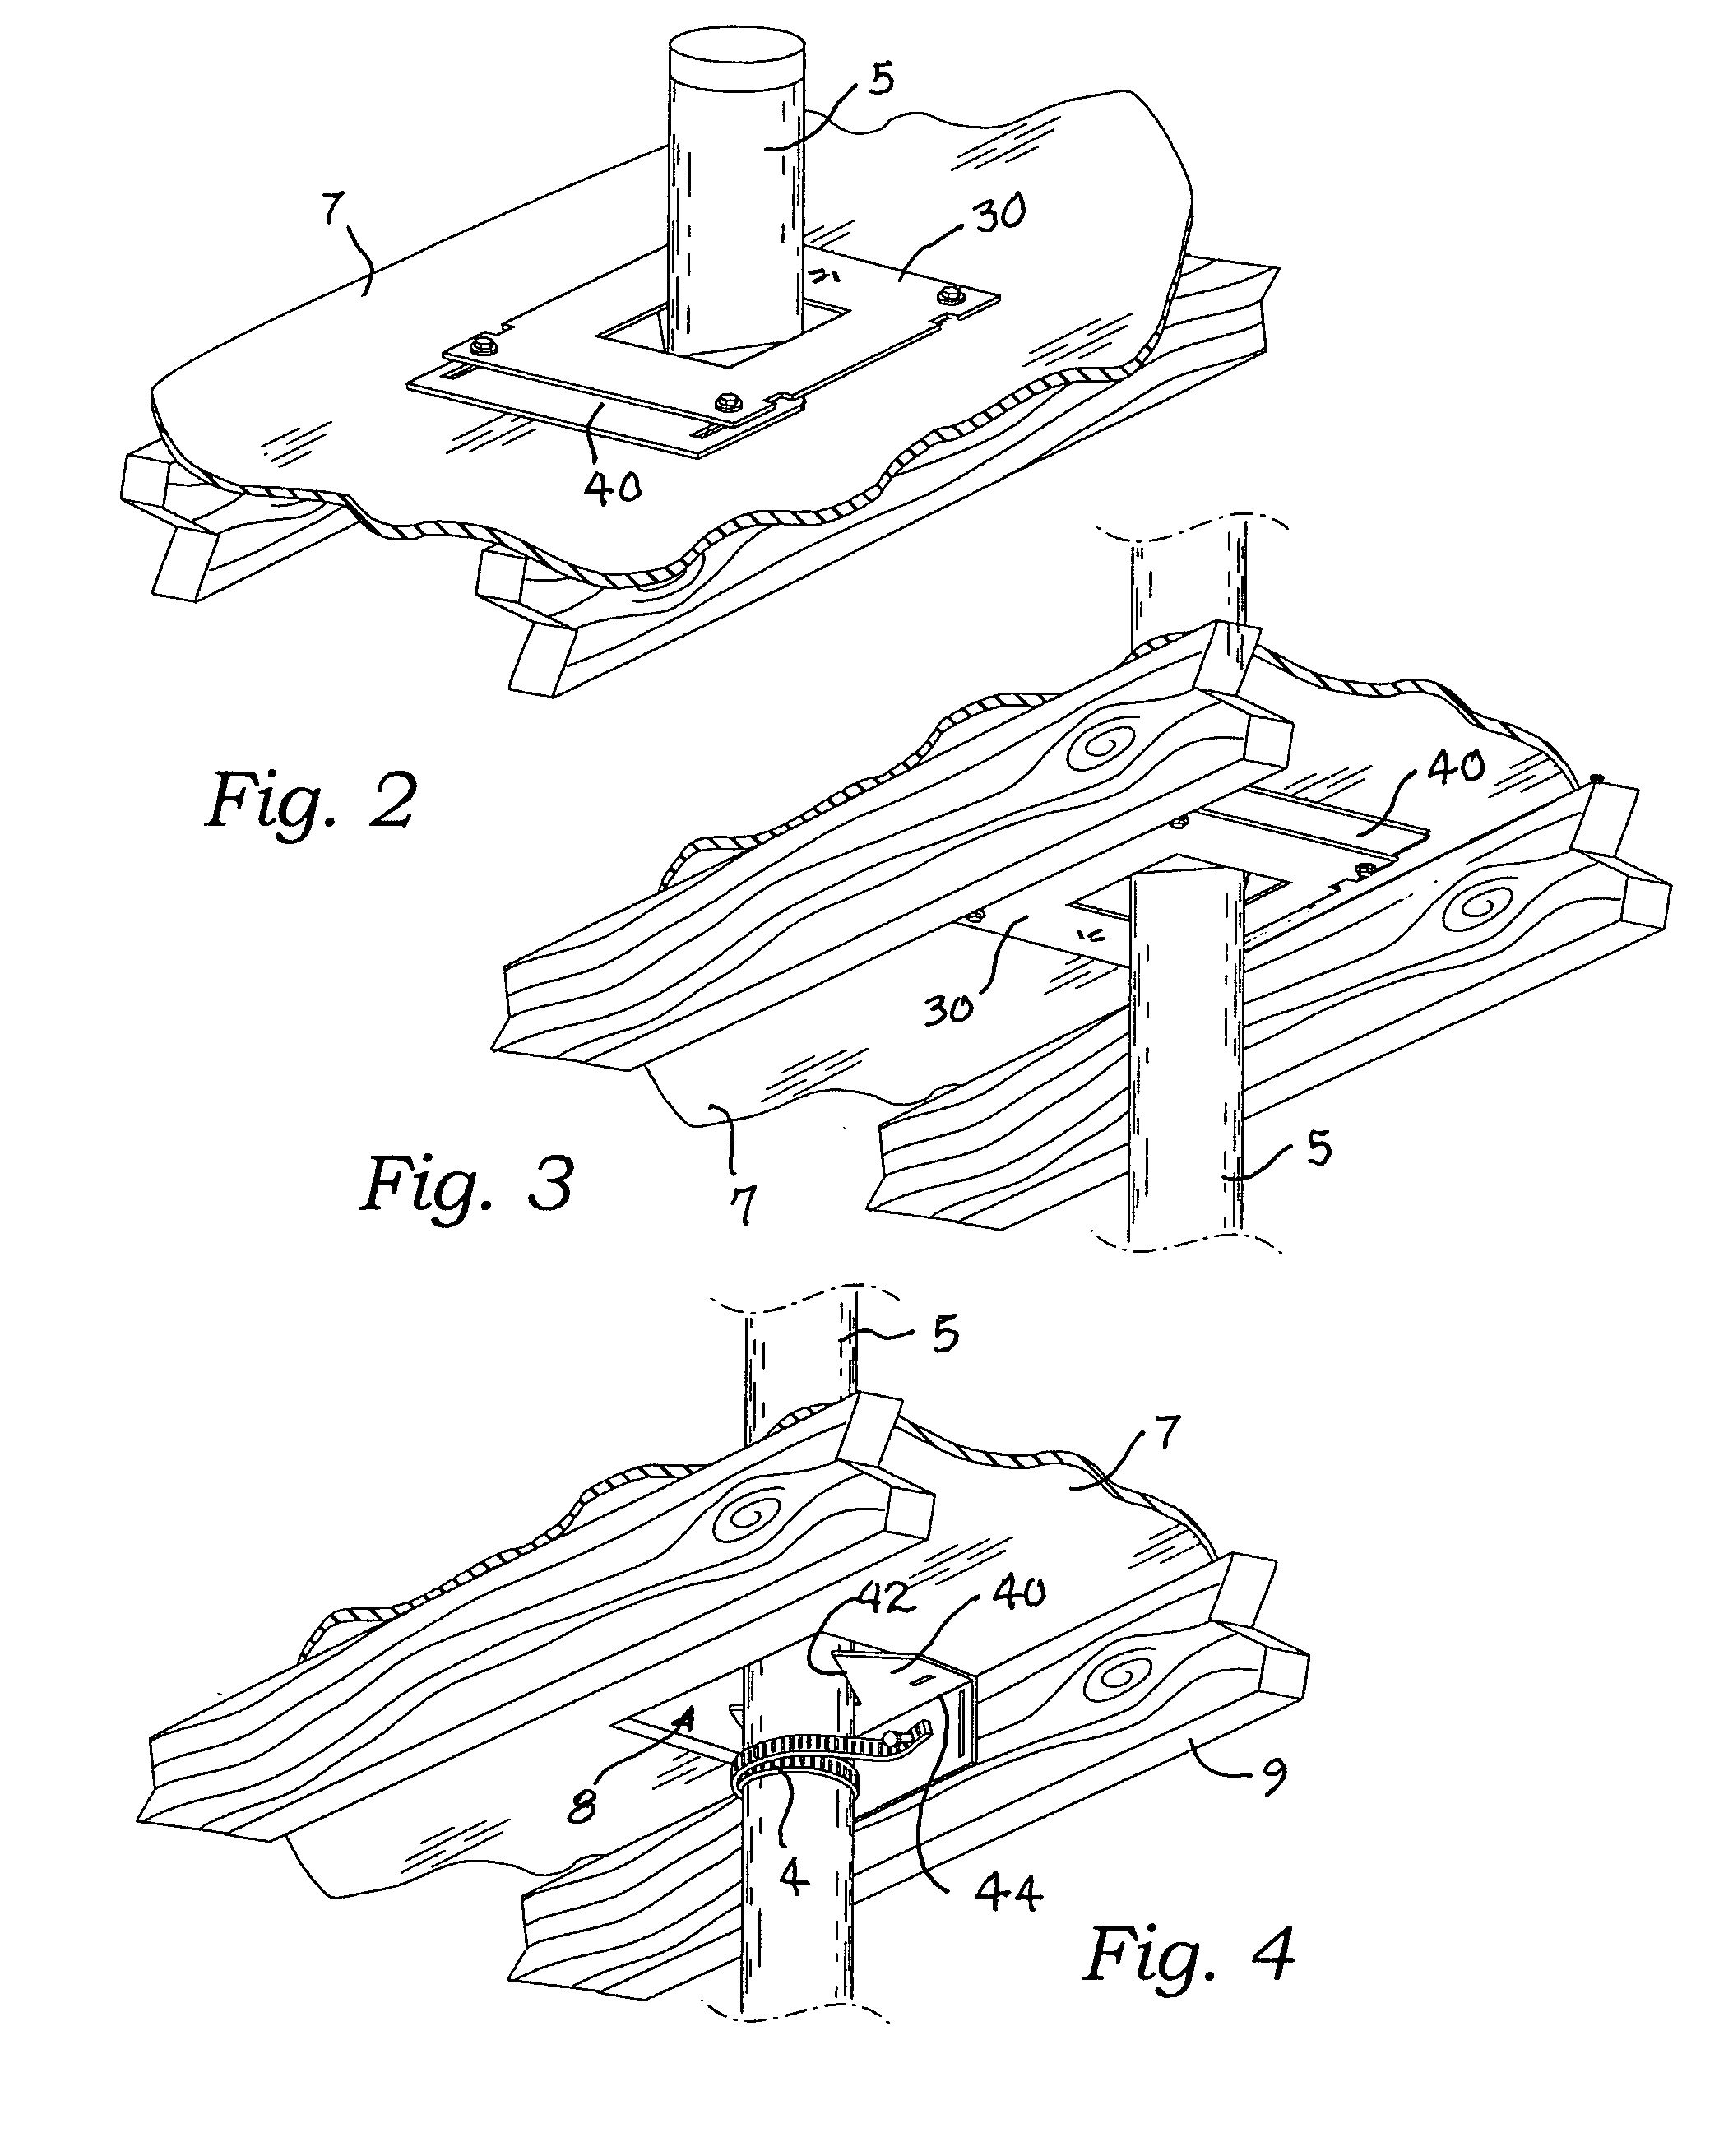 Break-apart assembly for supporting an exhaust flue